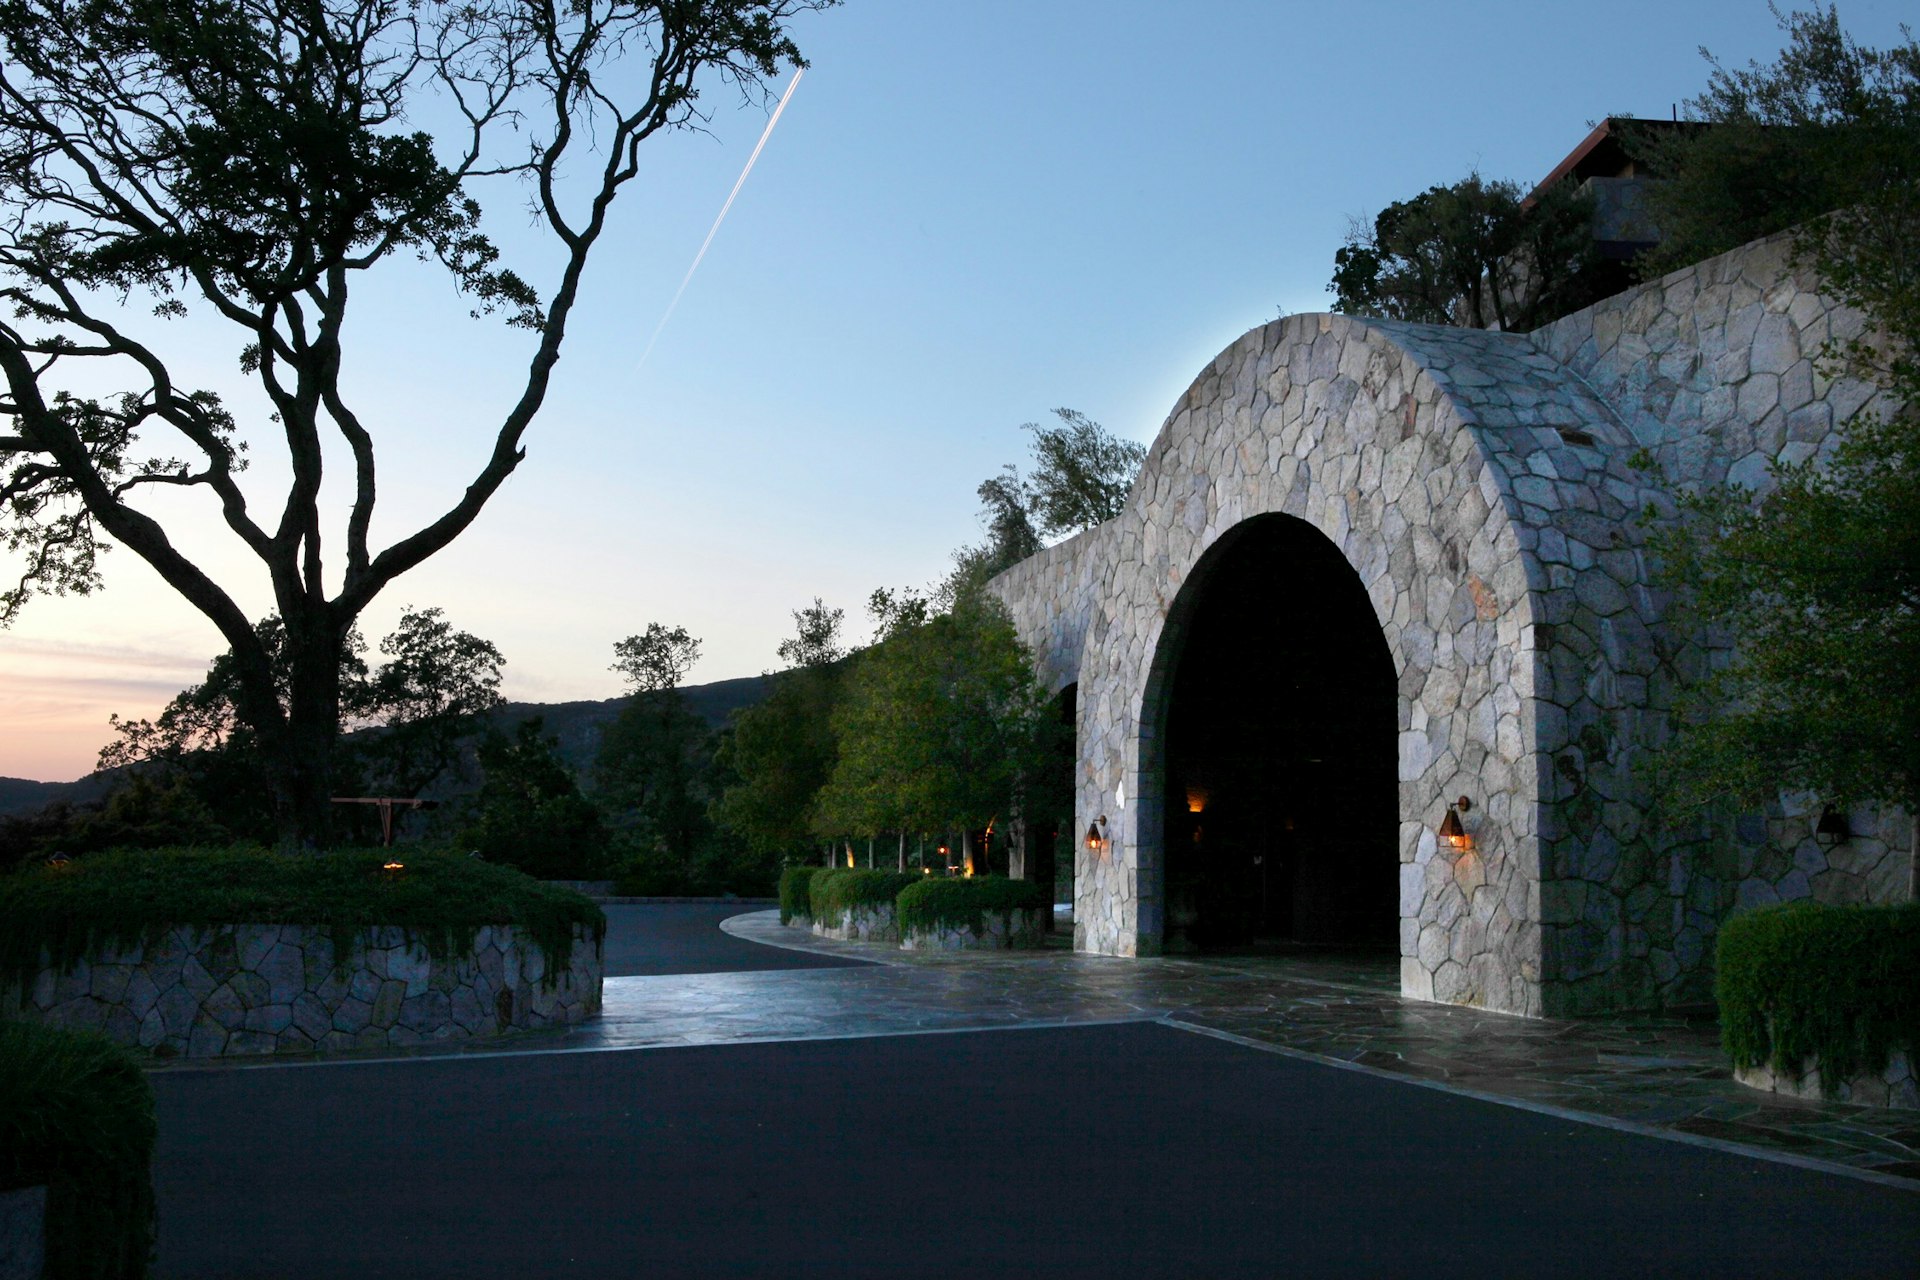 A stone arch in an outdoor setting